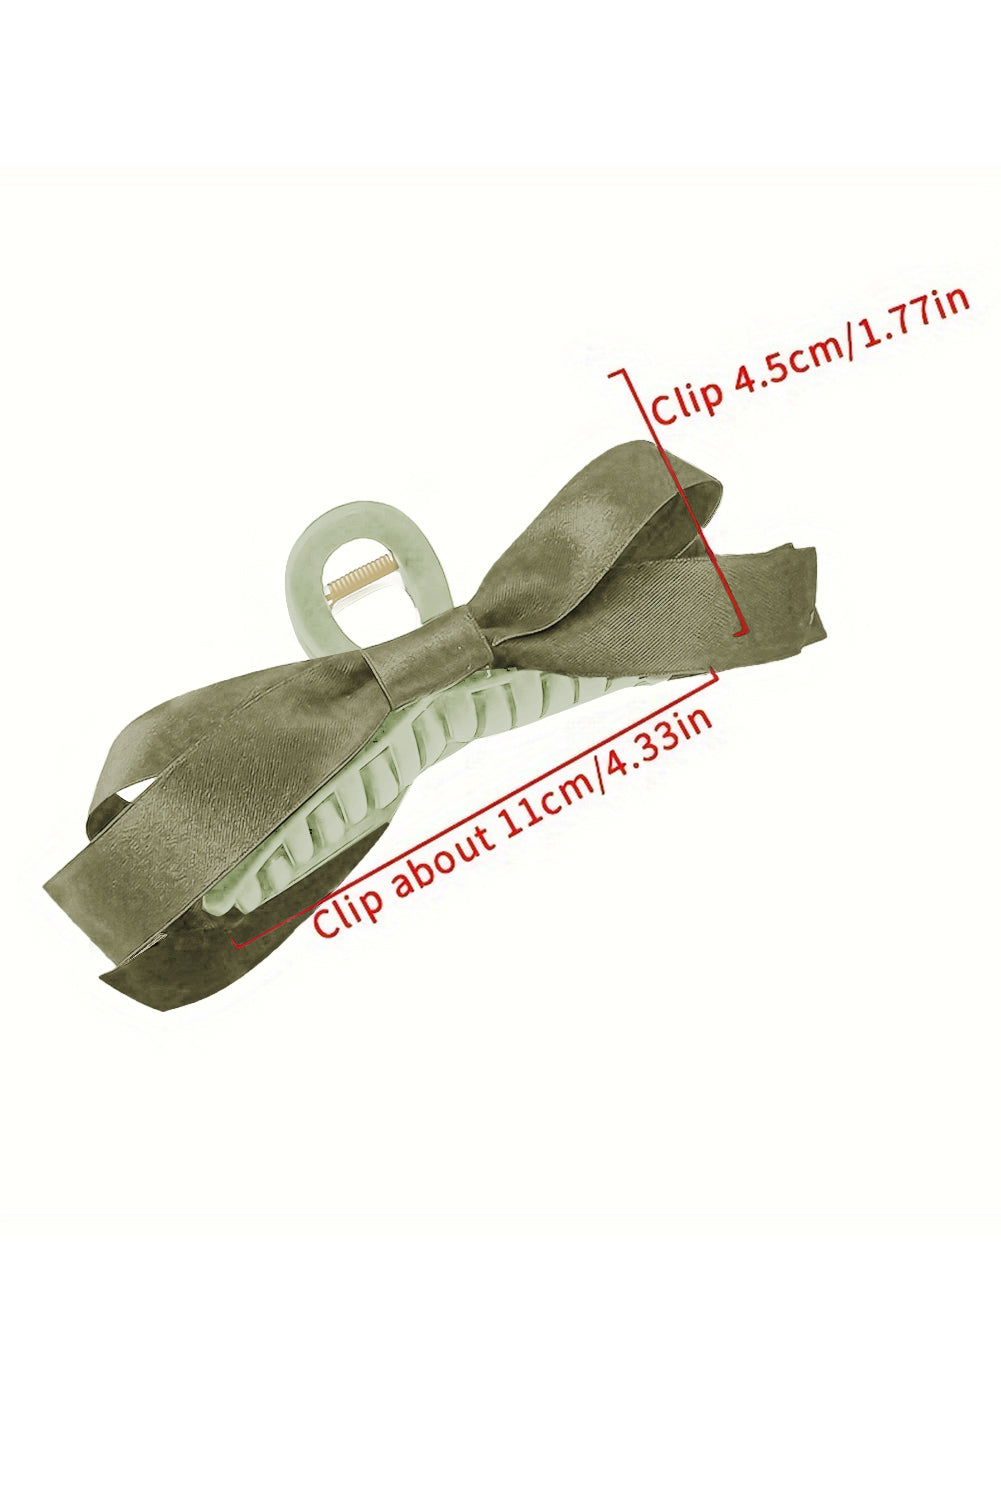 Mist Green Solid Color Ribbon Bow Decor Hair Clip